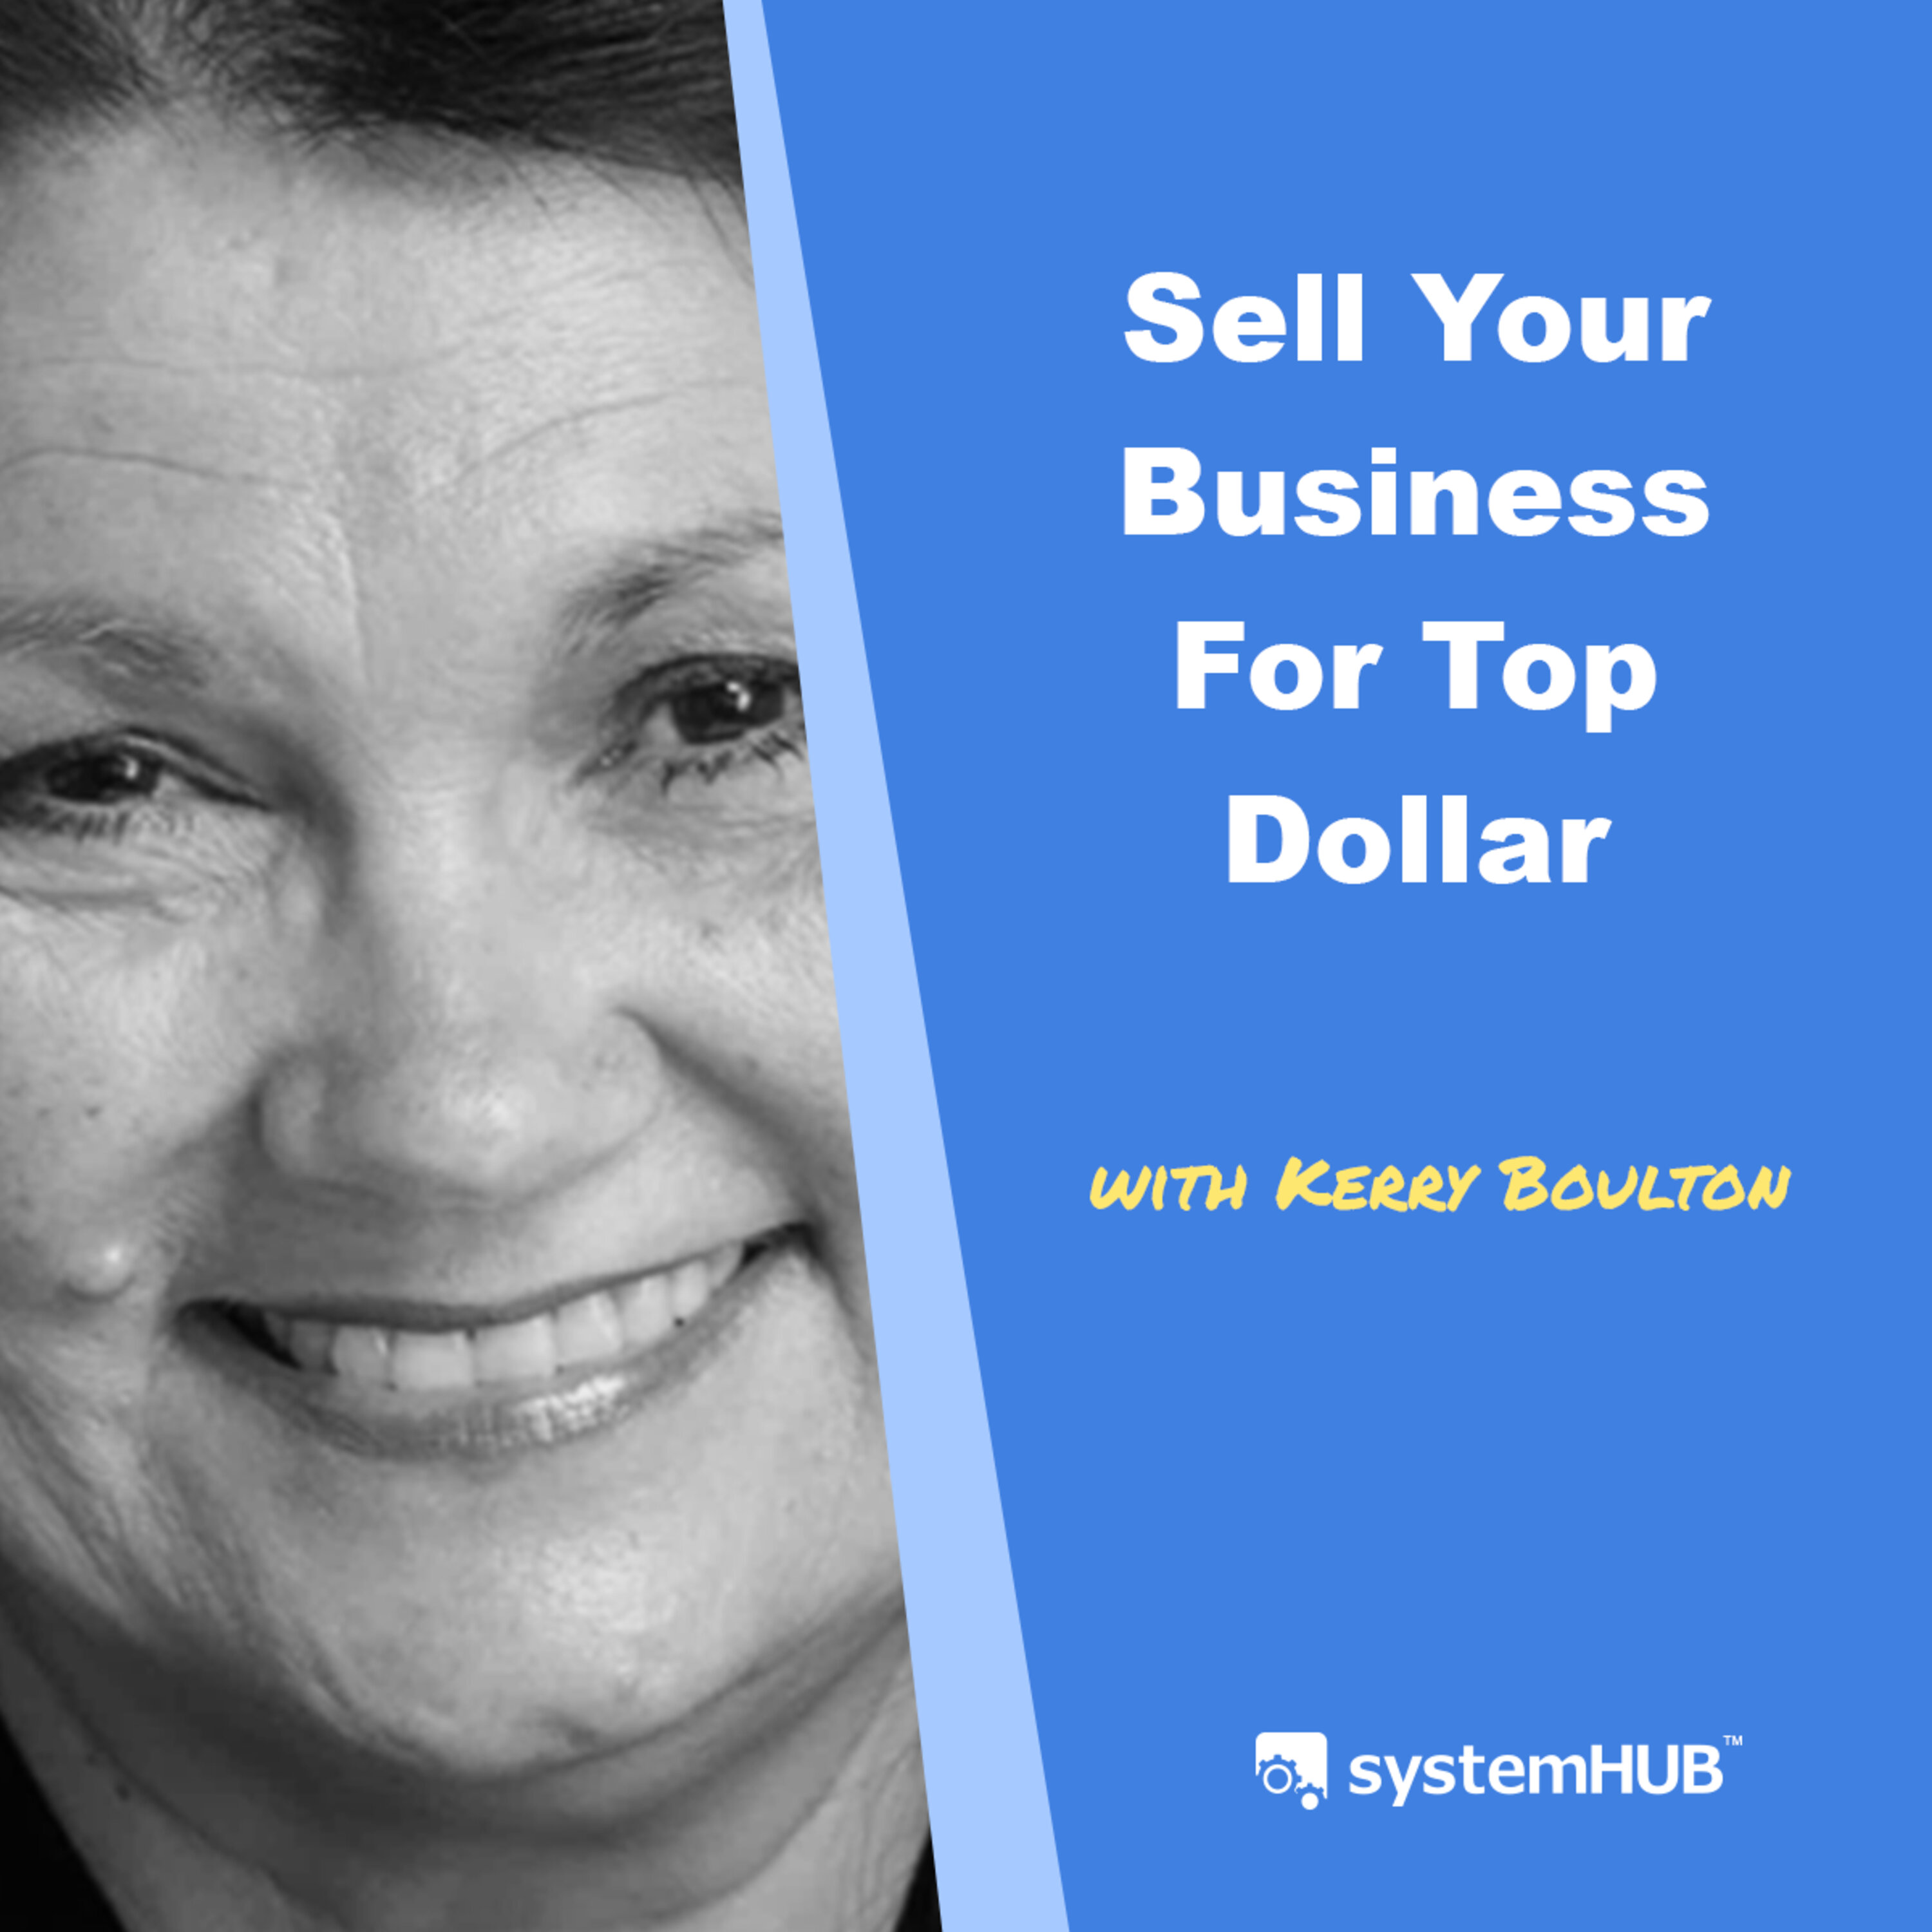 The System To Sell Your Business For Top Dollar with Kerry Boulton